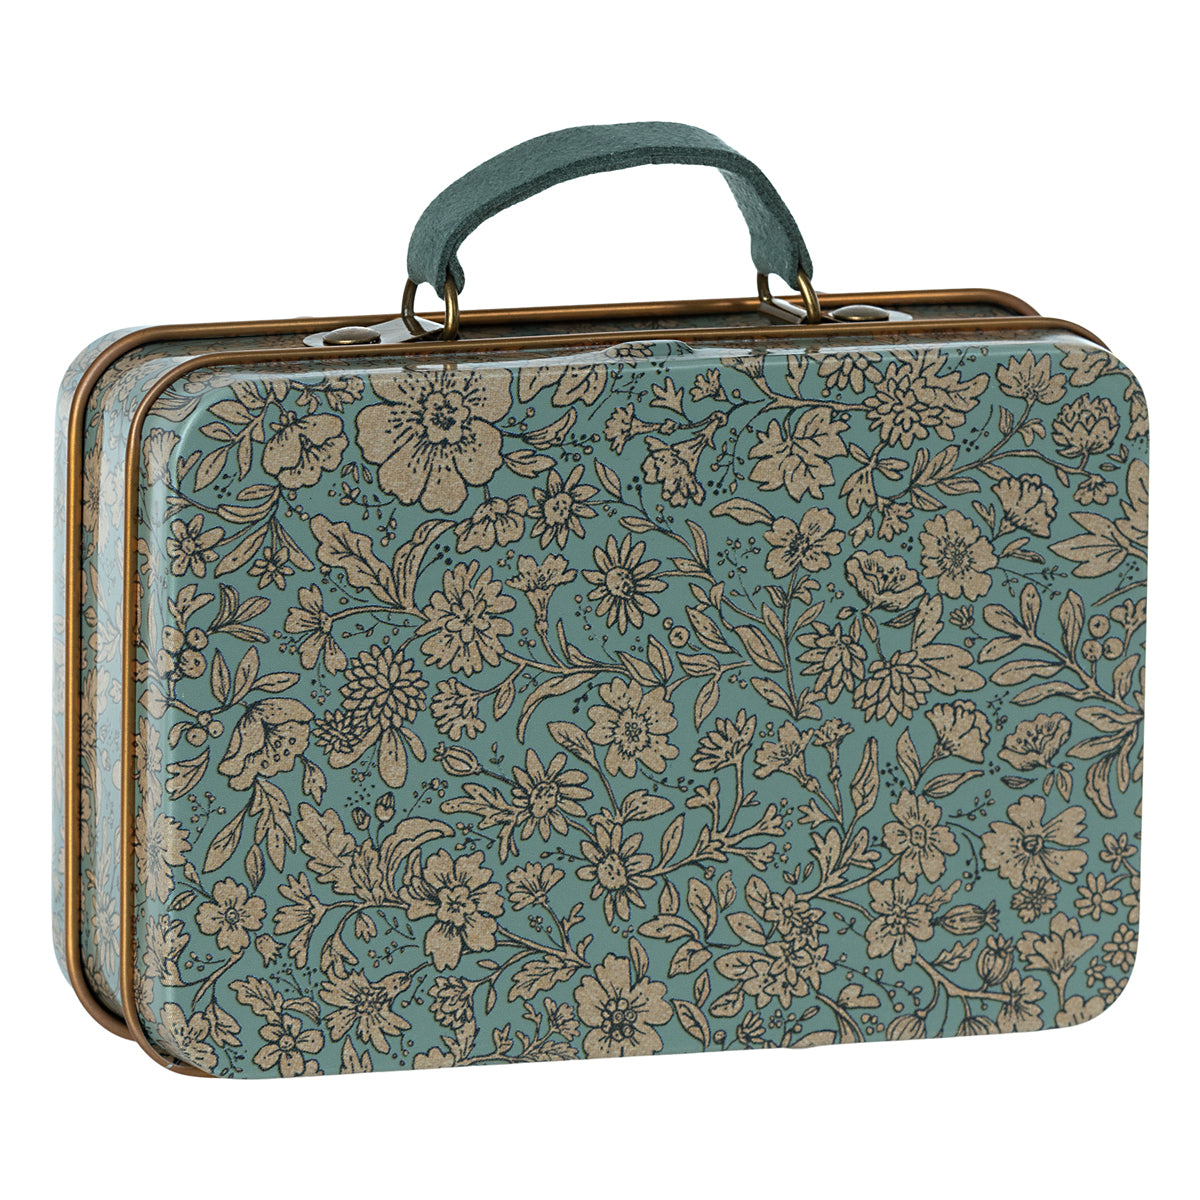 Maileg Small suitcase, Blossom - Blue